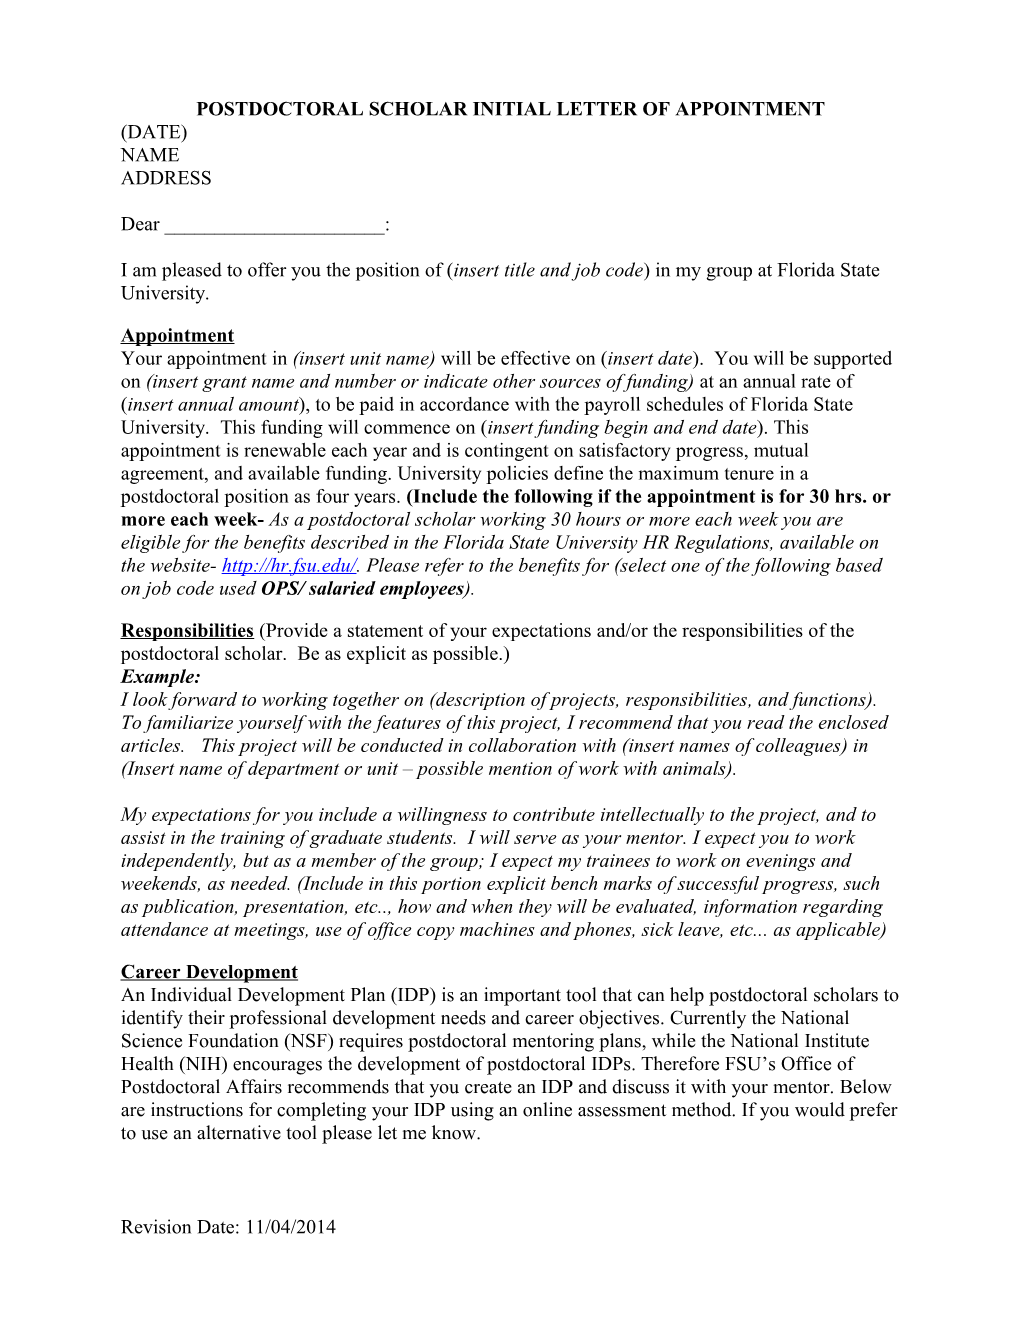 Postdoctoral Scholarinitial Letter of Appointment